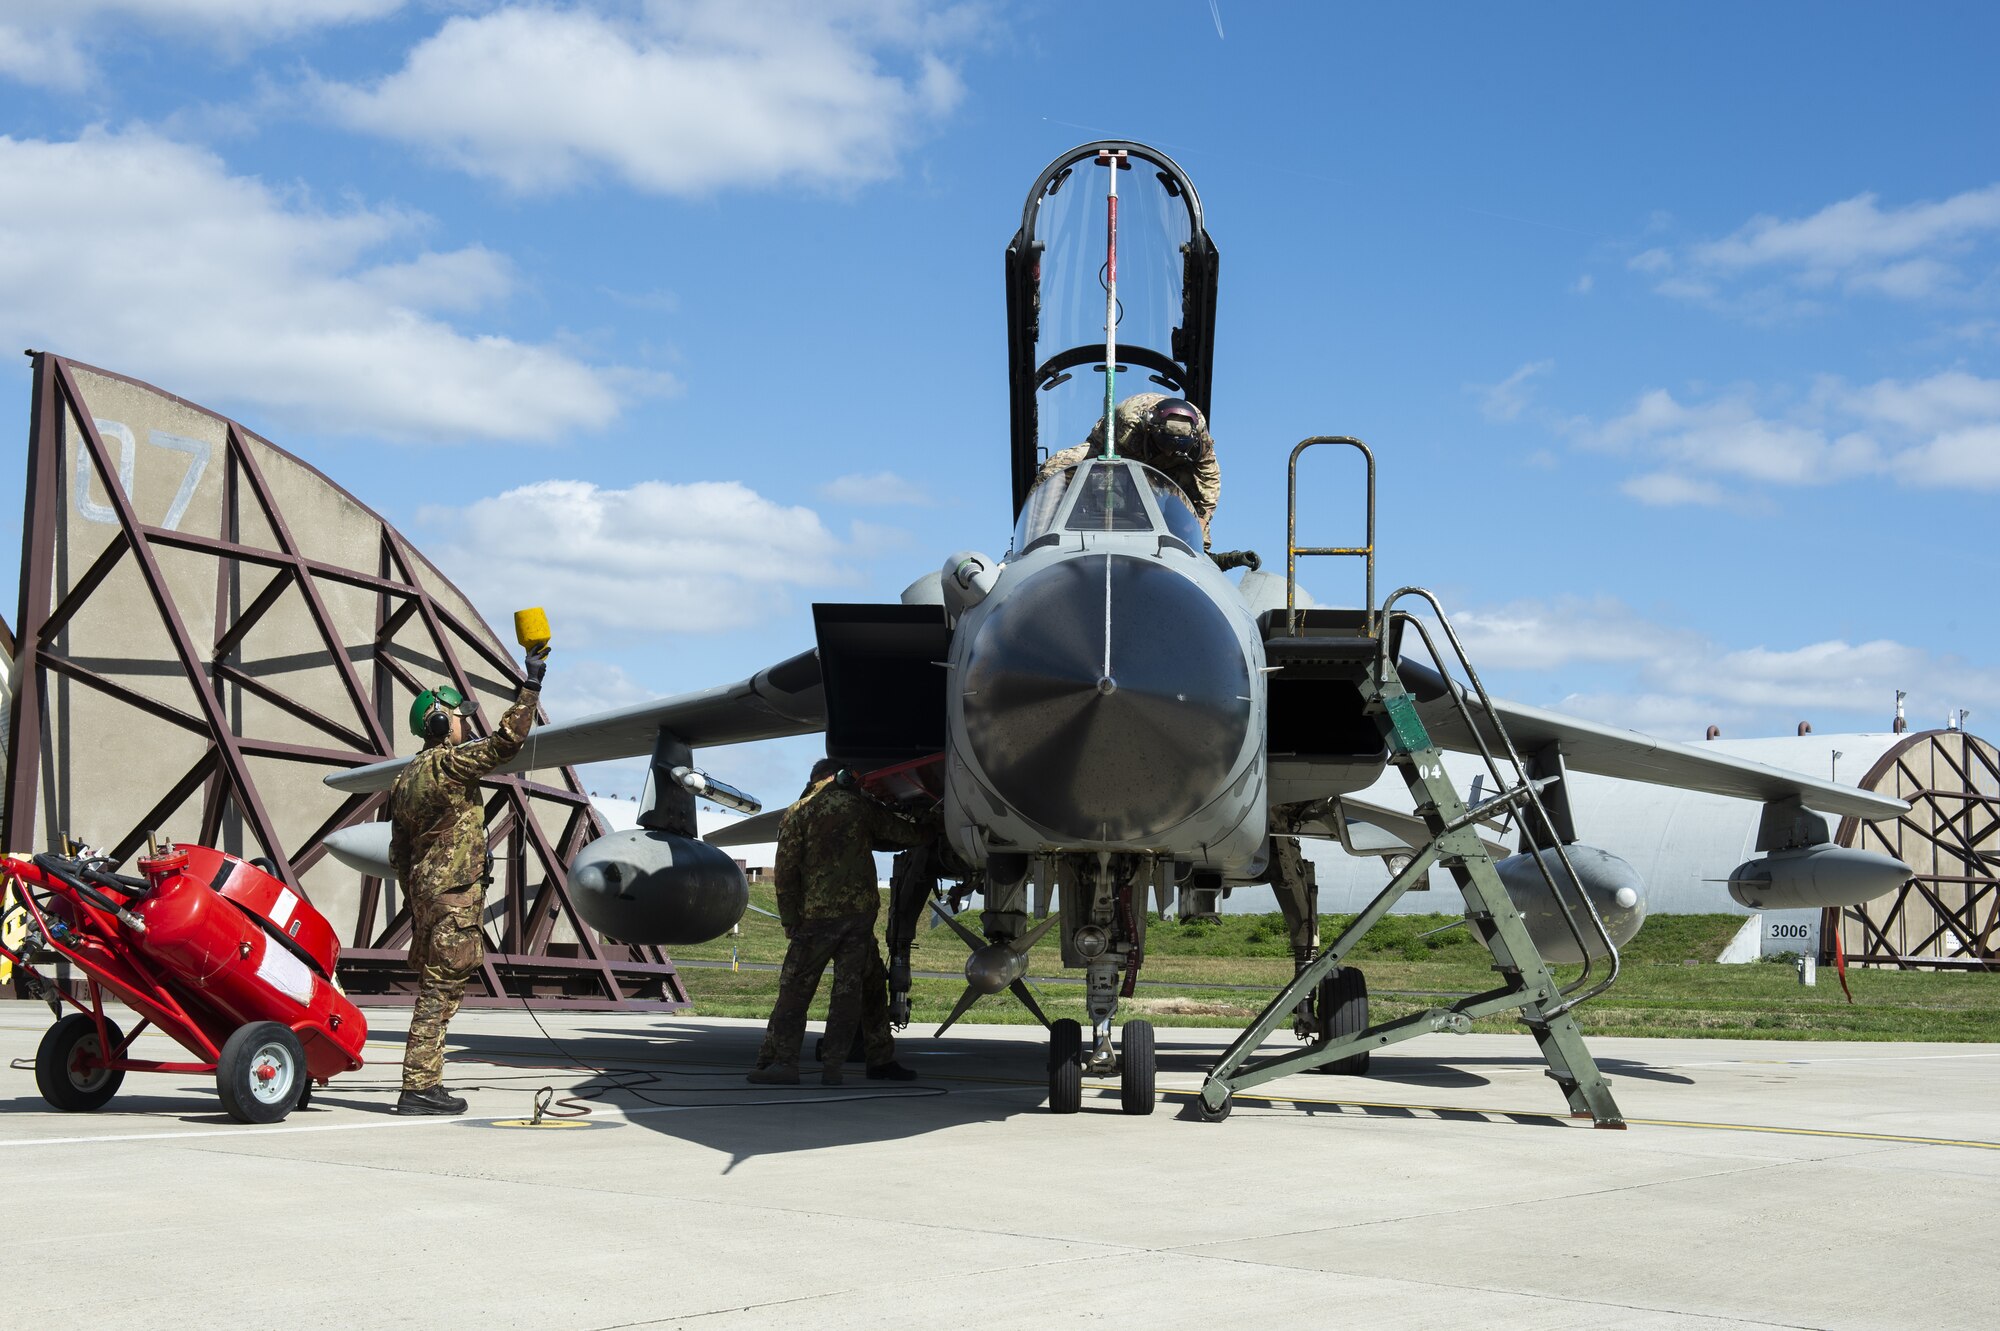 U.S. Air Force F-16s and Tornados worked together improving the integration and interoperability of the participating assets.